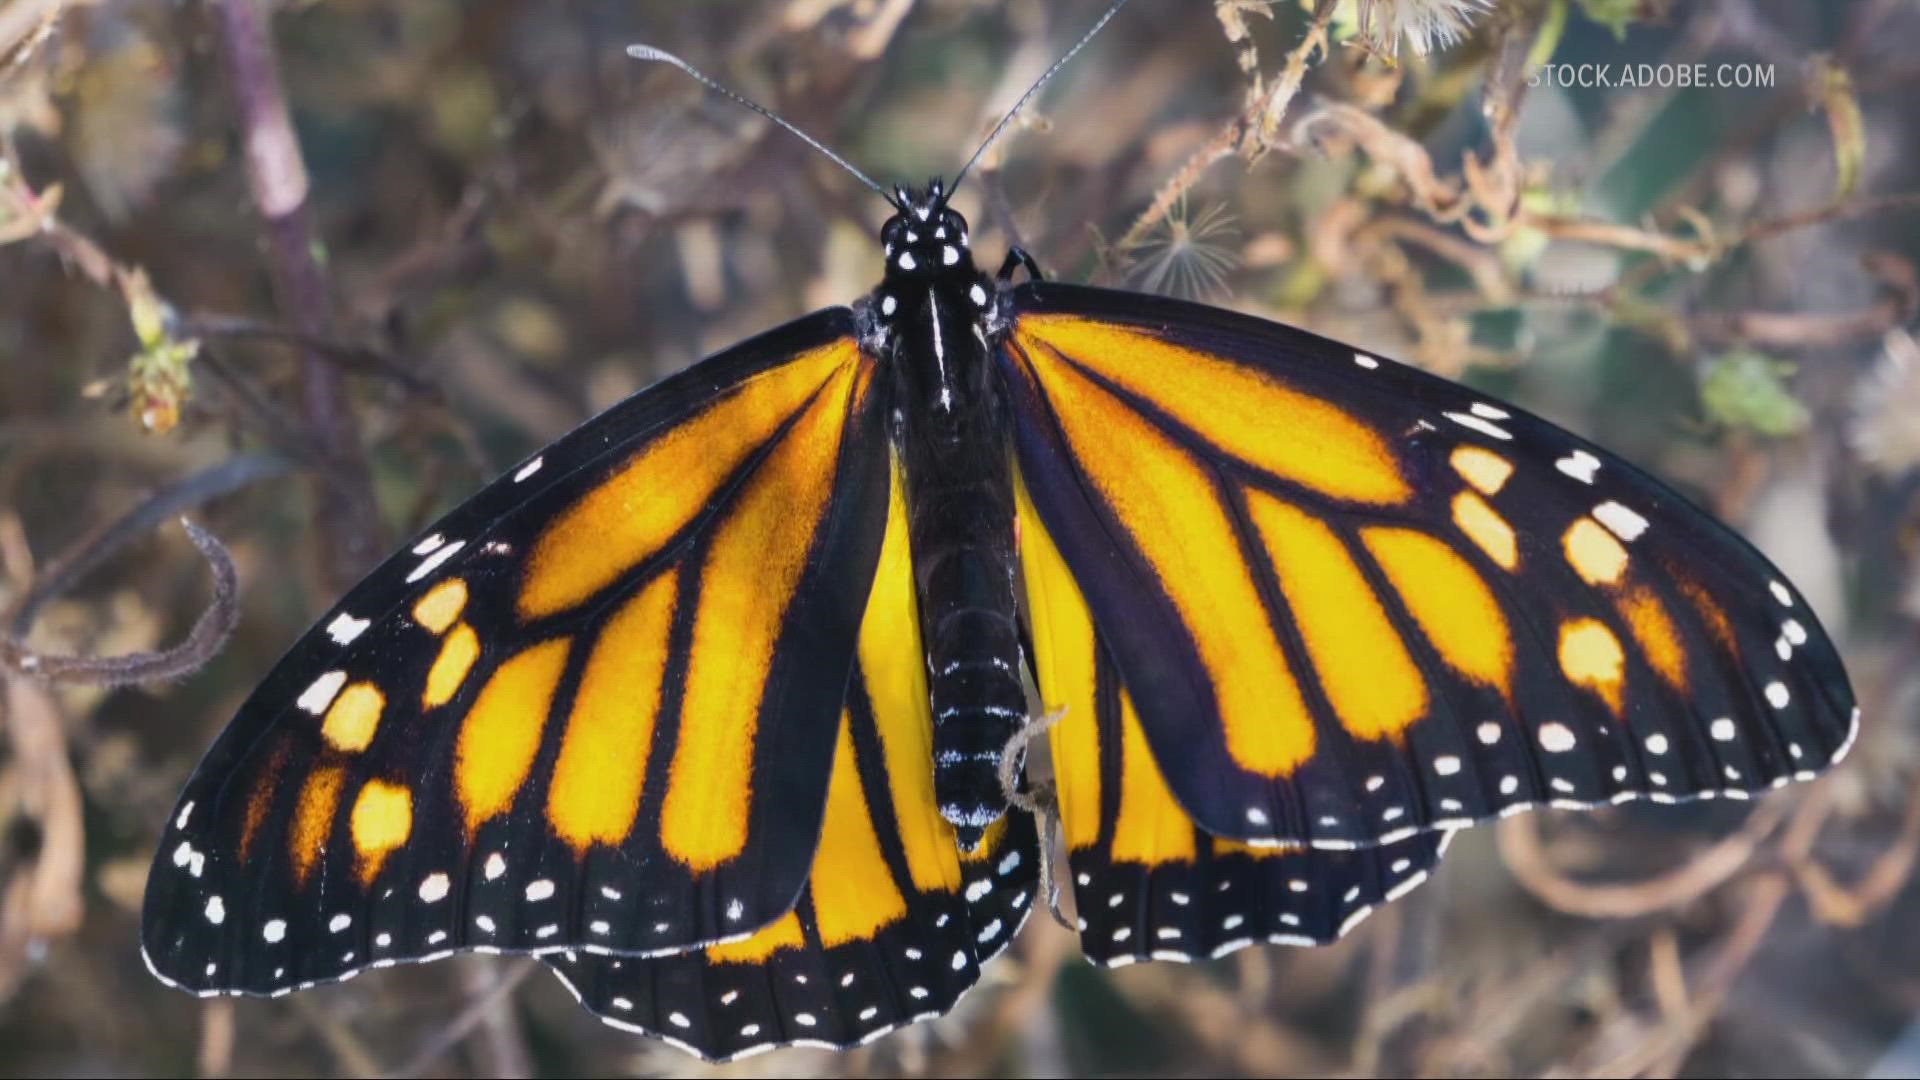 Environmentalists say the population of monarch butterflies in North America has declined between 22% and 72% over 10 years, depending on the measurement method.